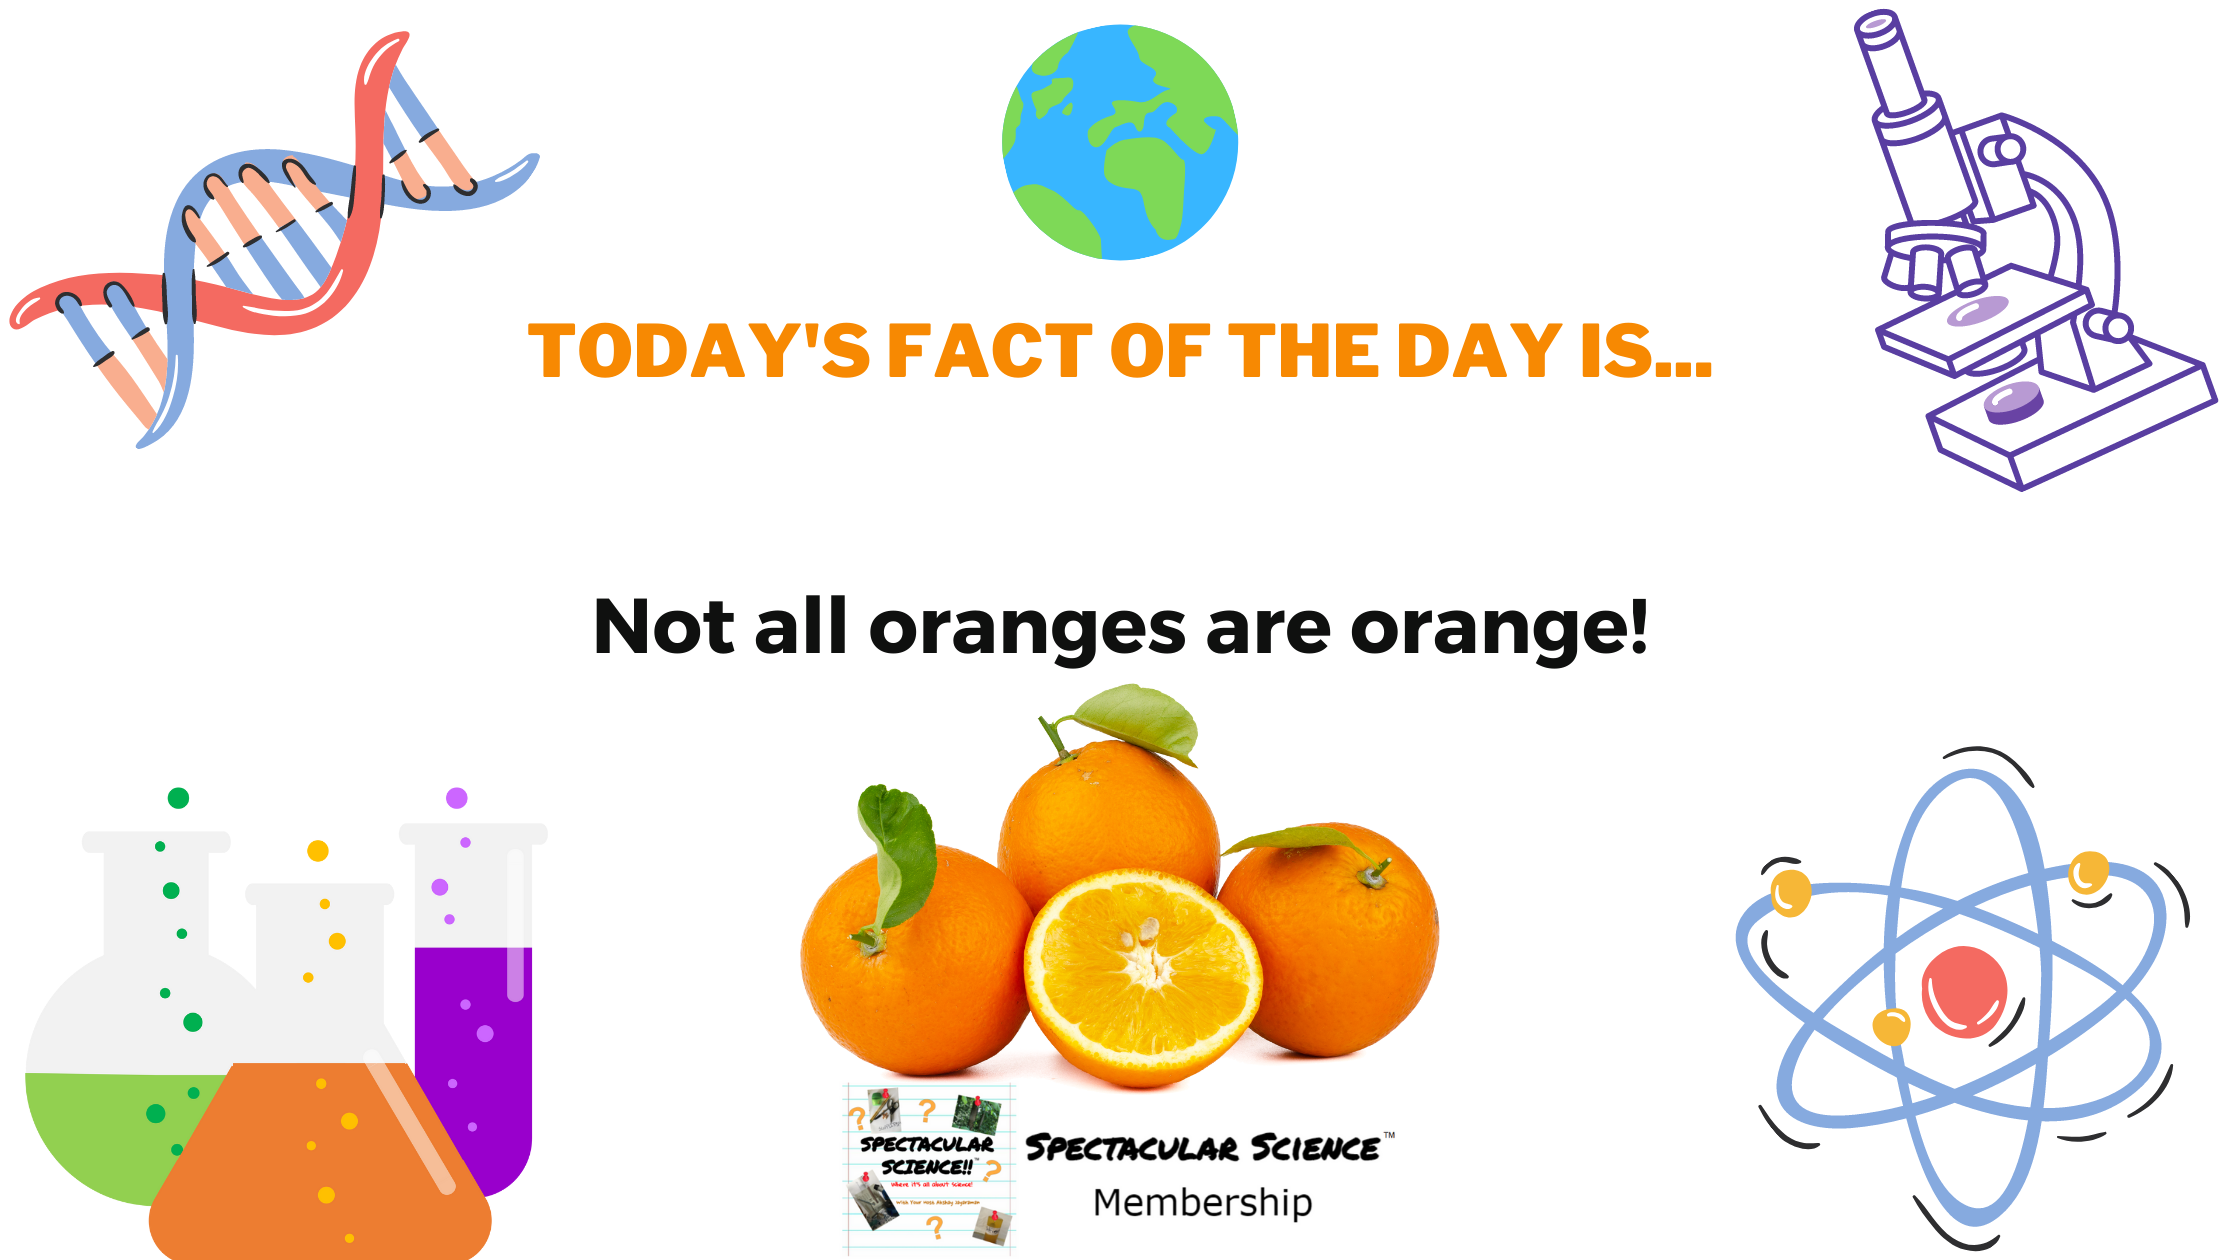 Fact of the Day Image June 5th